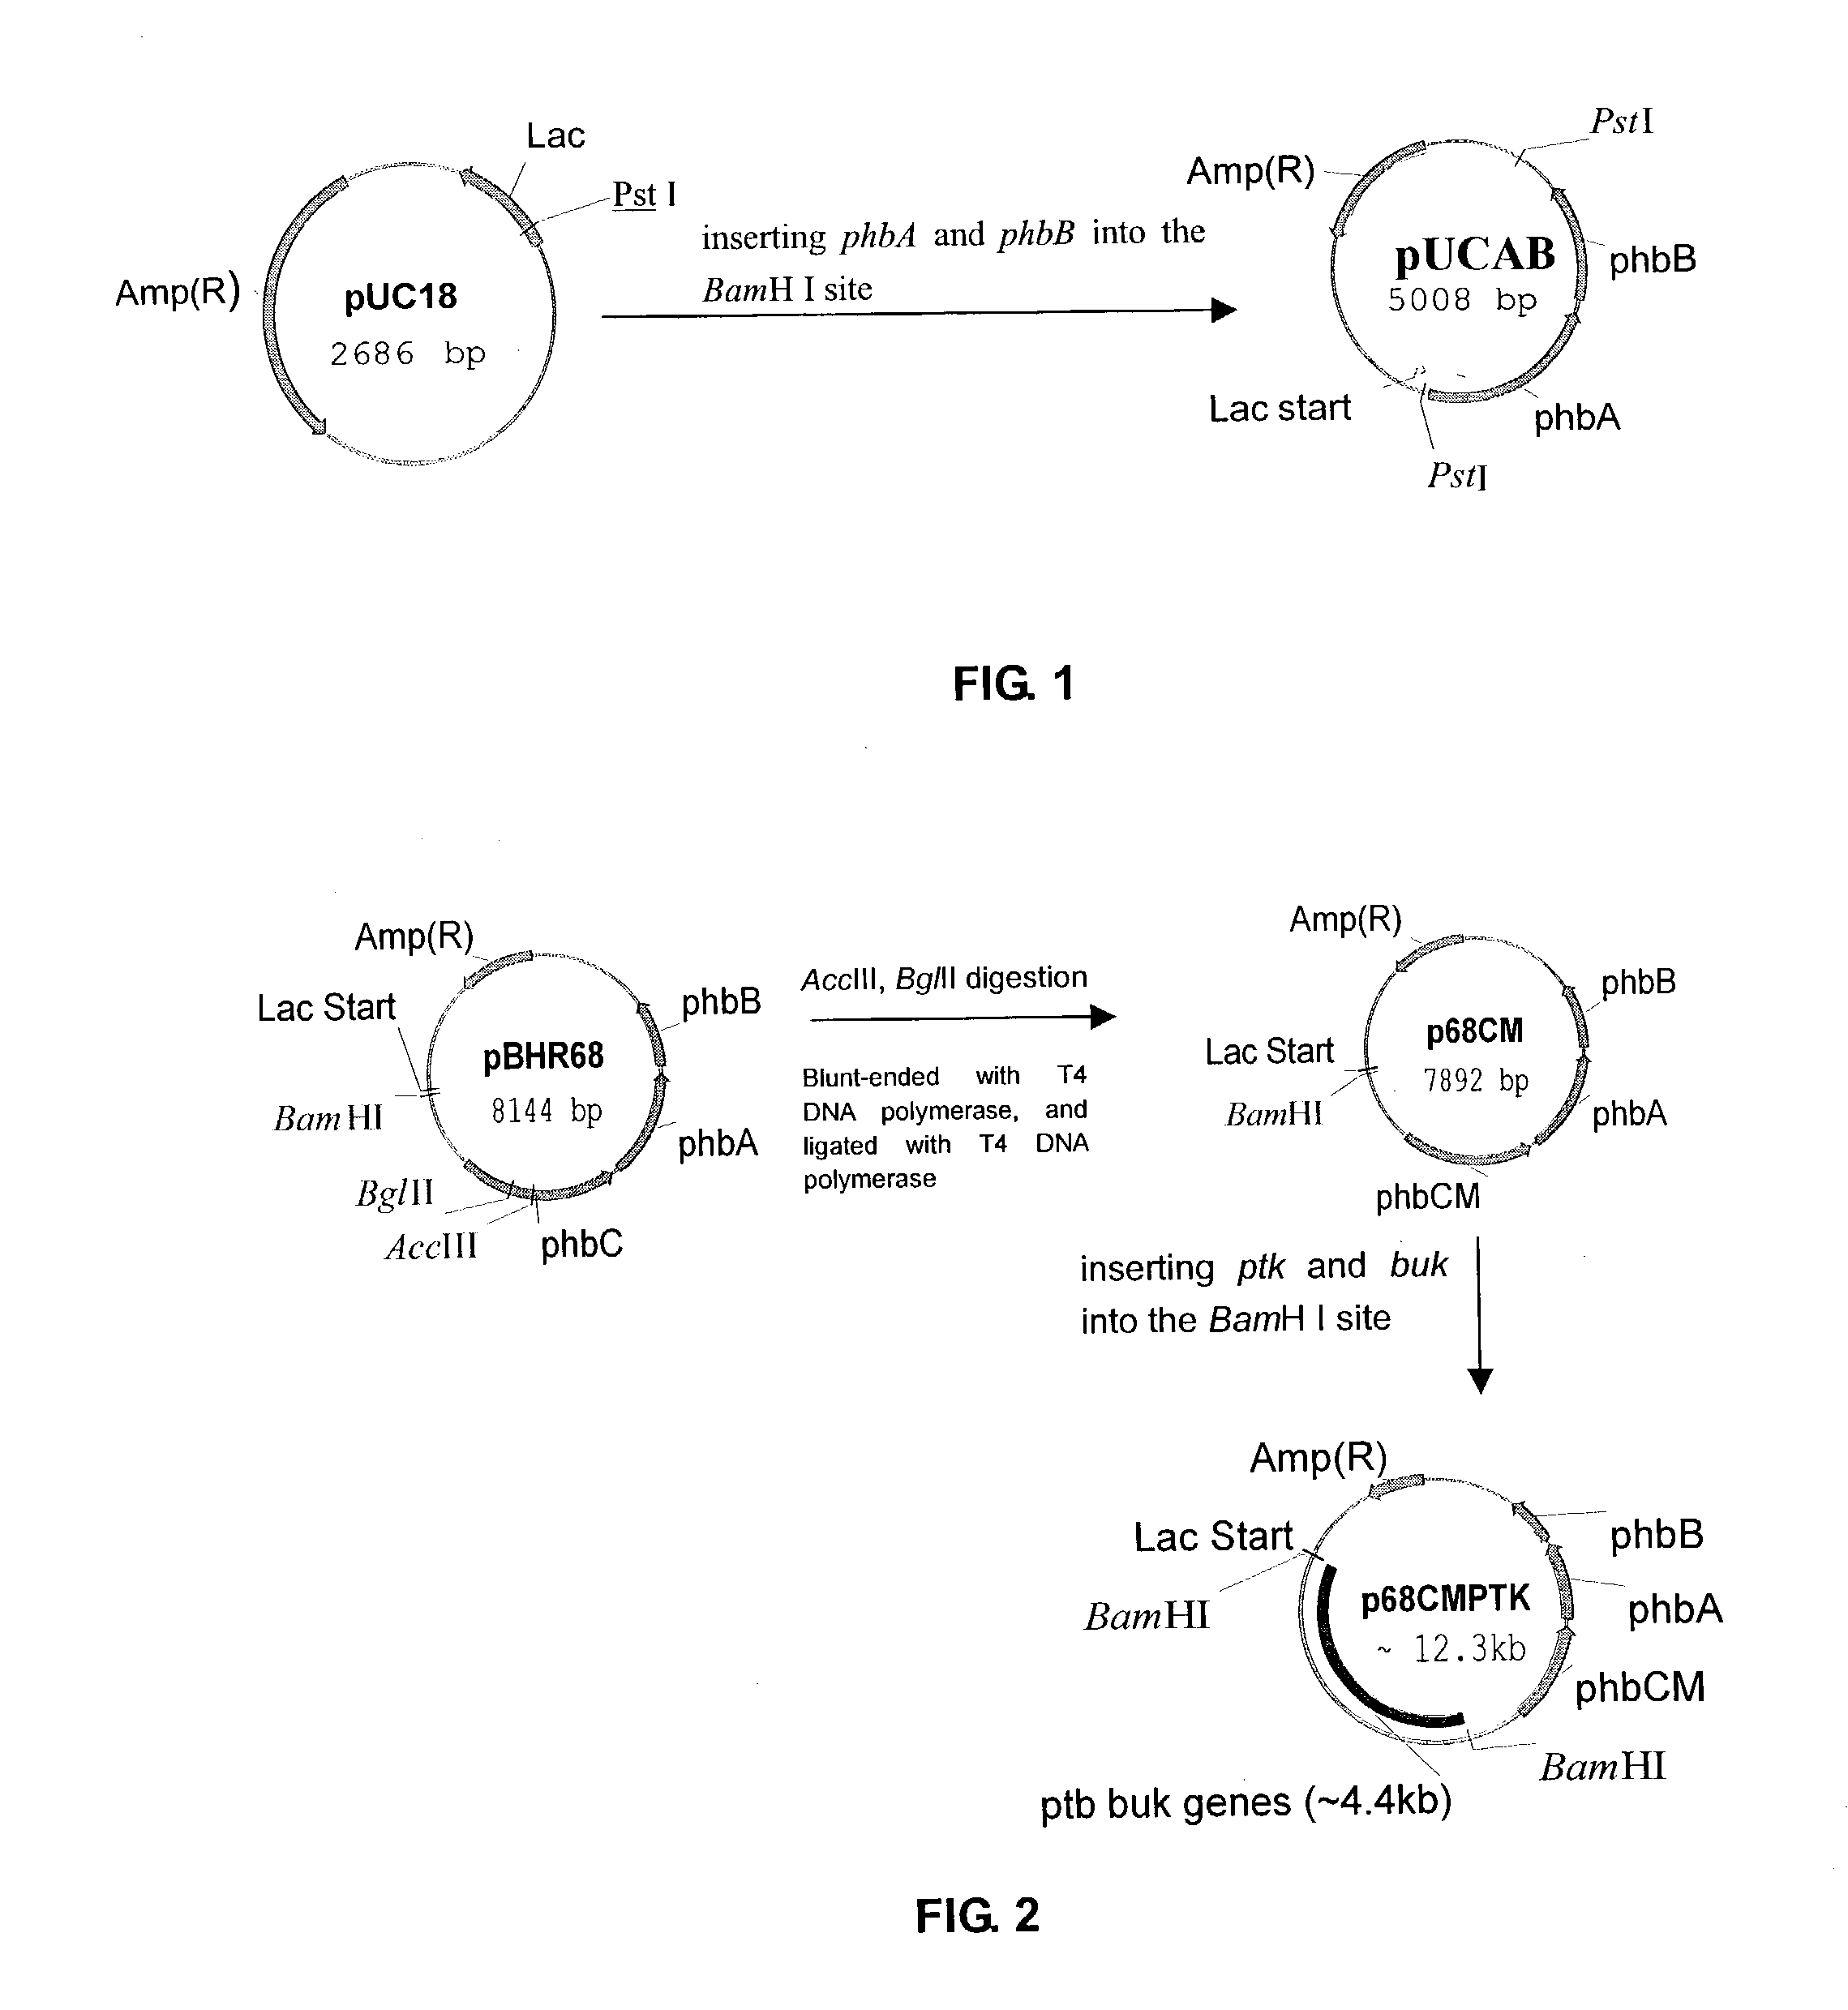 Method for the production of D-(-)-3-hydroxybutyric acid by recombinant esherichia coli